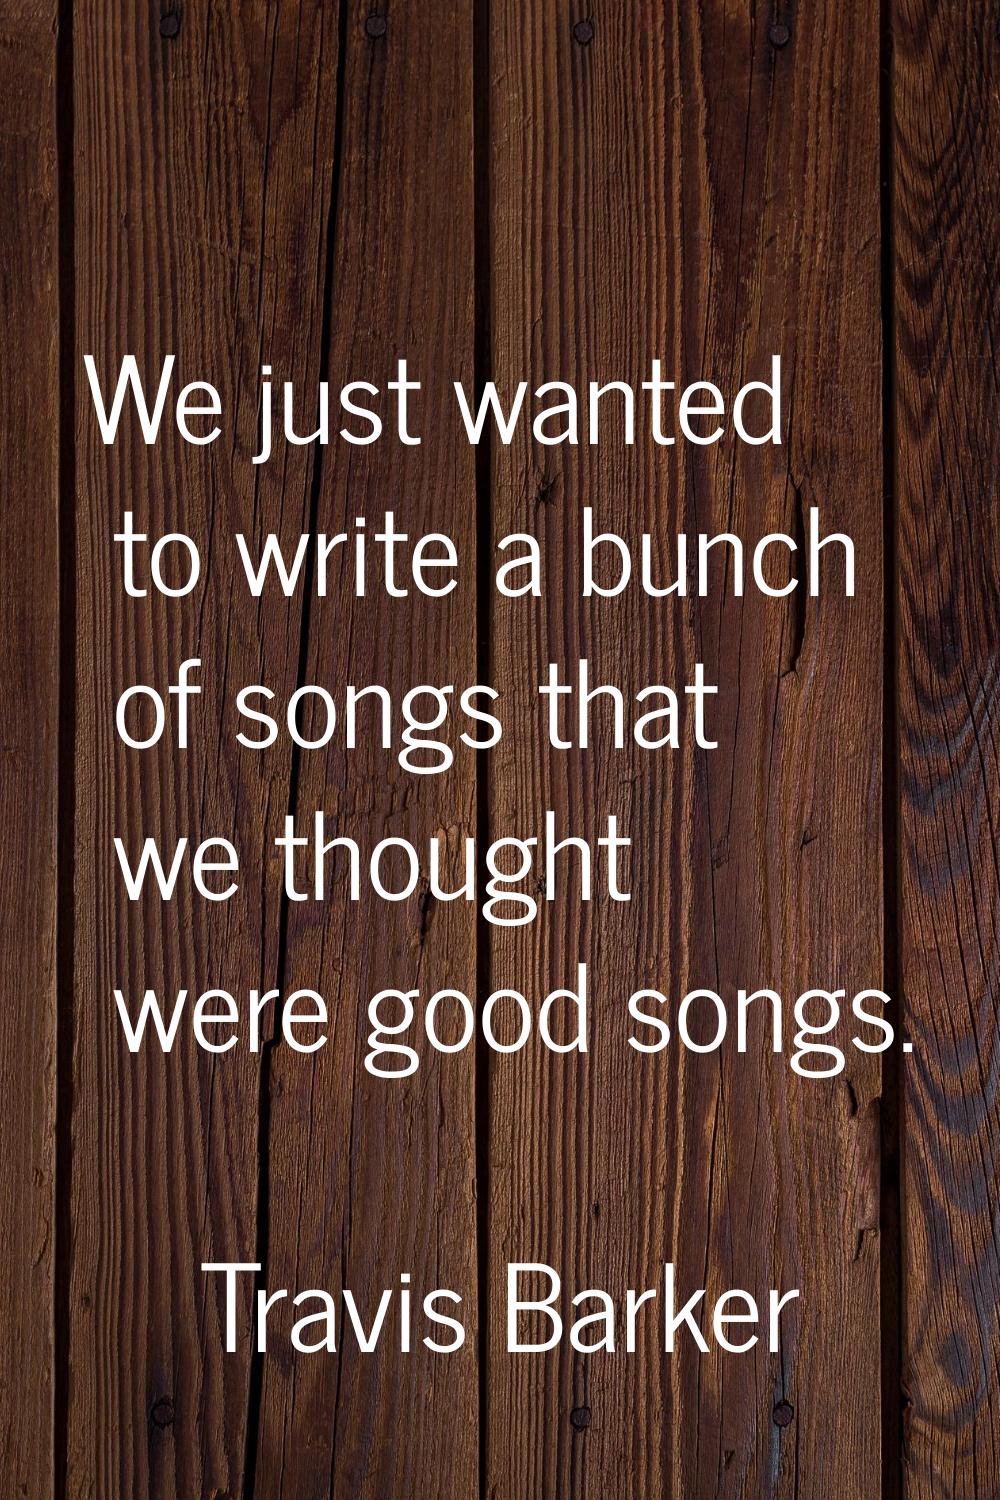 We just wanted to write a bunch of songs that we thought were good songs.